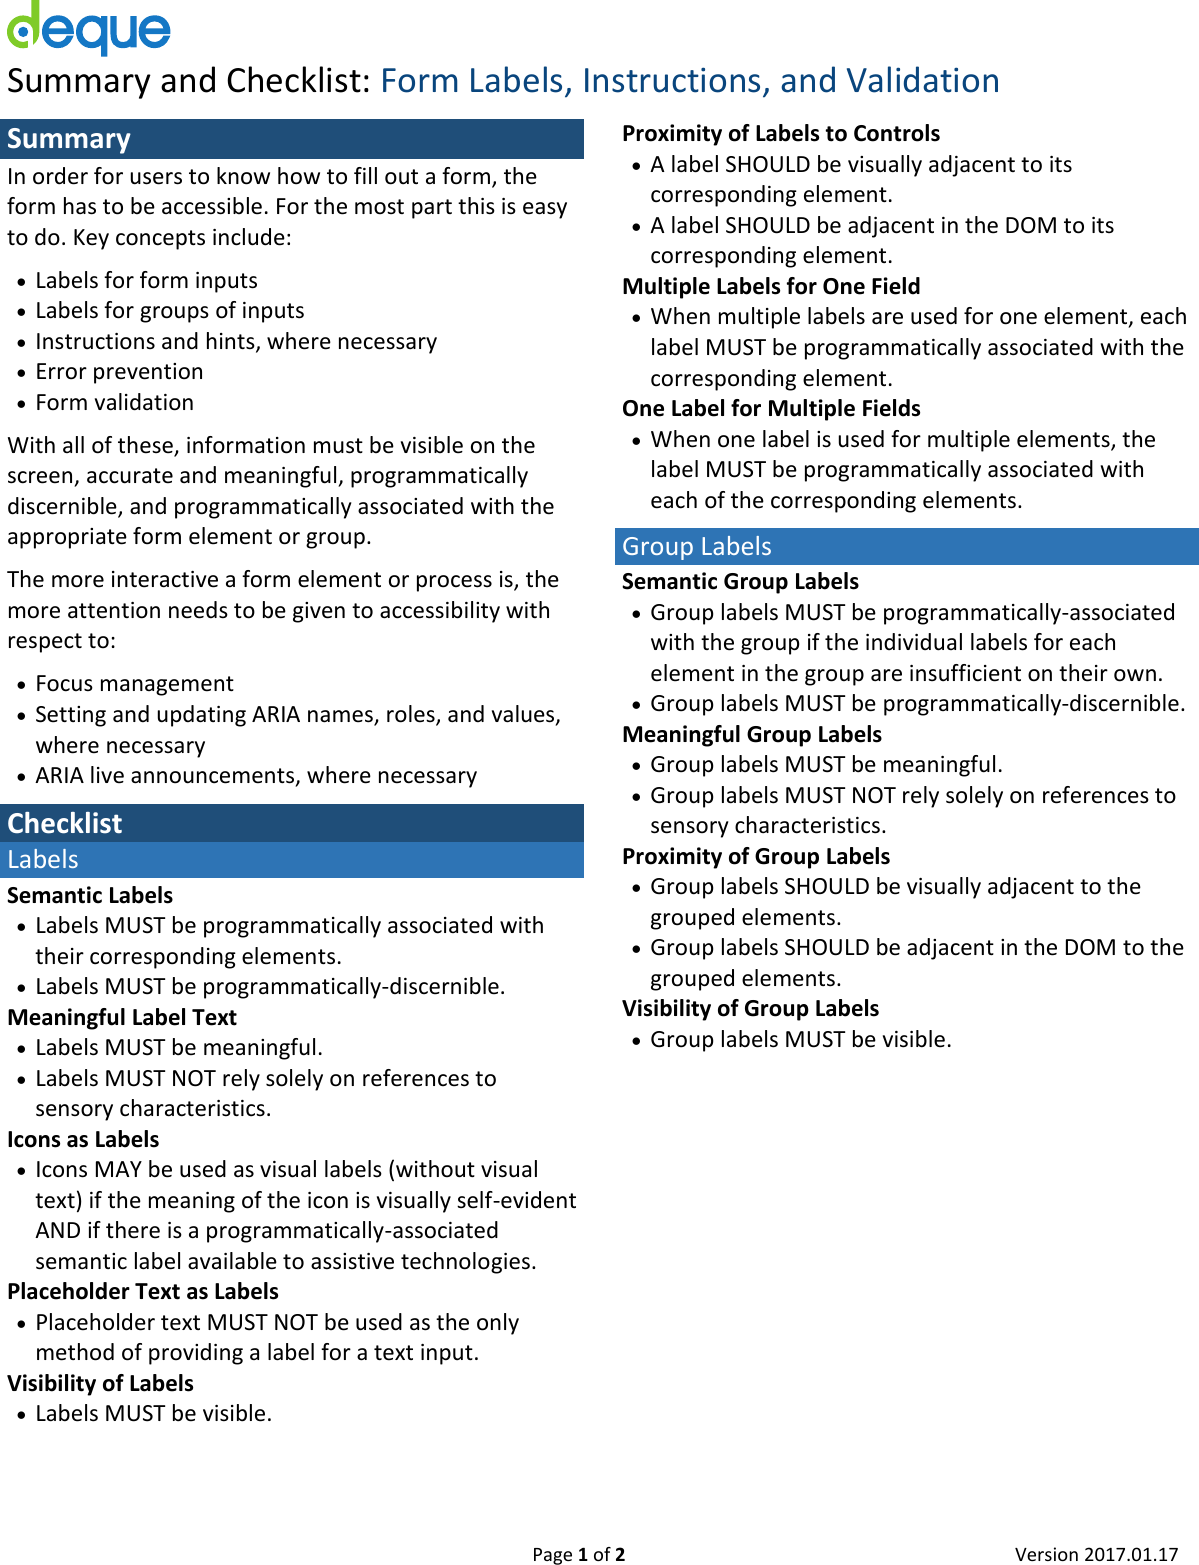 Page 1 of 2 - Deque Summary And Checklist: Form Labels, Instructions, Validation - Design Checklist